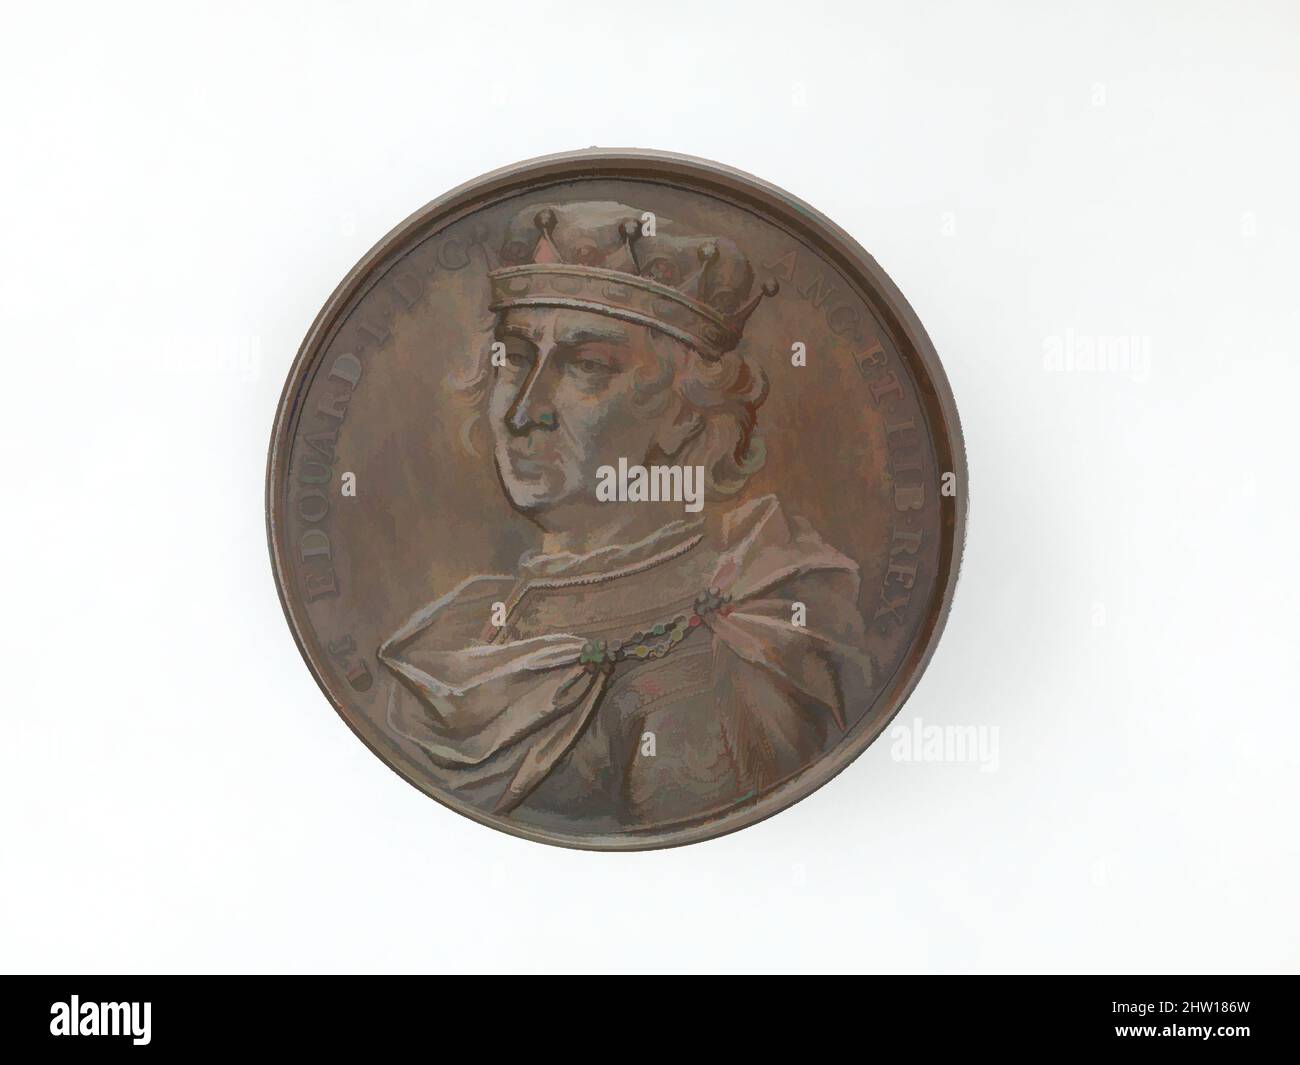 Art inspired by Edward I, 1731–32, British, Bronze, Diameter (confirmed): 4.1 cm (41 mm), Medals and Plaquettes, Medalist: Jean Dassier (Geneva 1676–1763 Geneva), This medal of Edward I belongs to the English Monarchs series by the Swiss medalist Jean Dassier (1676–1763). Dassier was, Classic works modernized by Artotop with a splash of modernity. Shapes, color and value, eye-catching visual impact on art. Emotions through freedom of artworks in a contemporary way. A timeless message pursuing a wildly creative new direction. Artists turning to the digital medium and creating the Artotop NFT Stock Photo